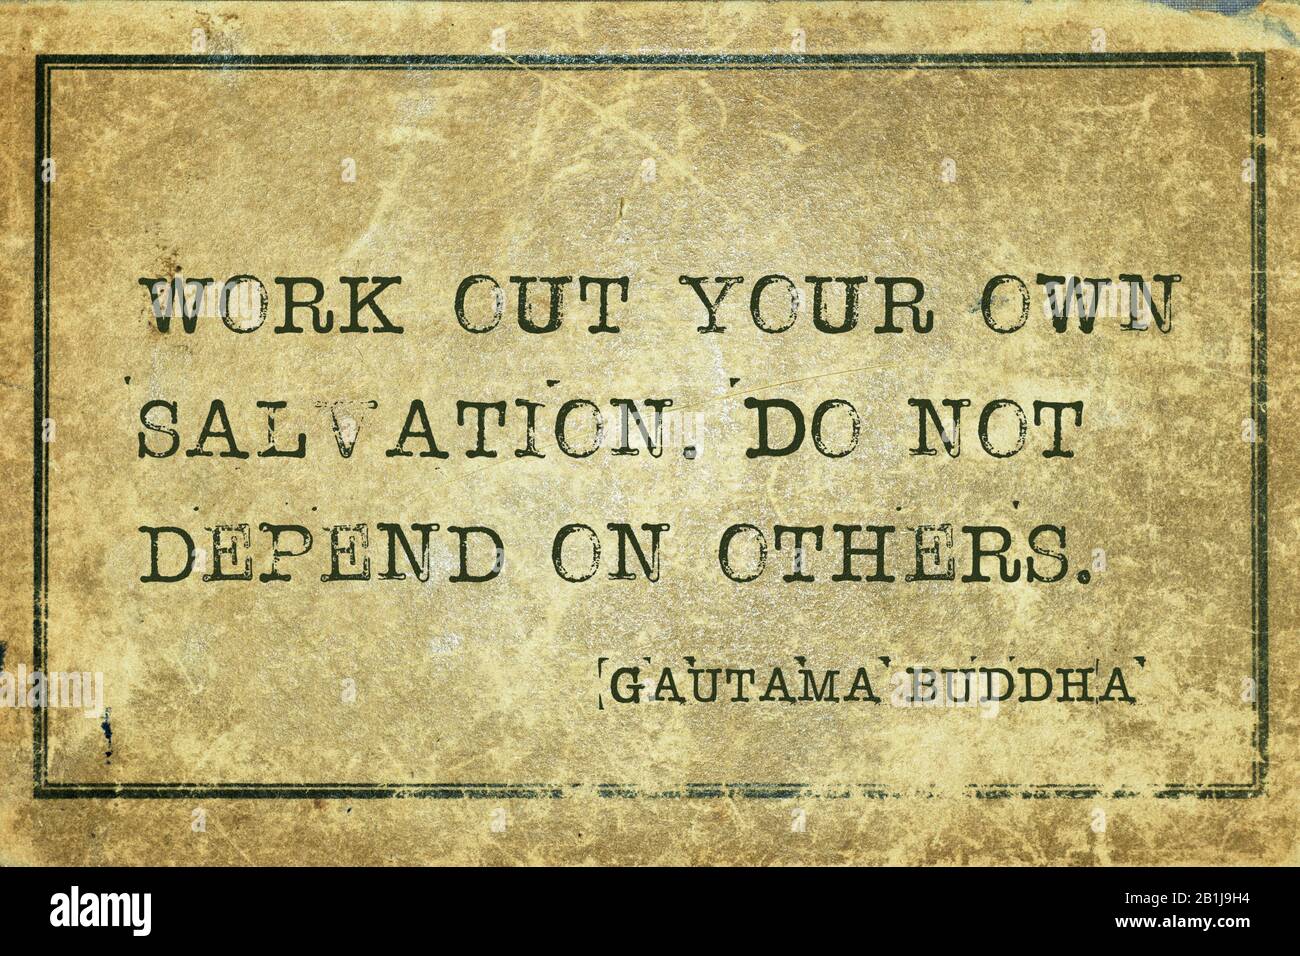 Work out your own salvation. Do not depend on others - famous quote of Gautama Buddha printed on grunge vintage cardboard Stock Photo